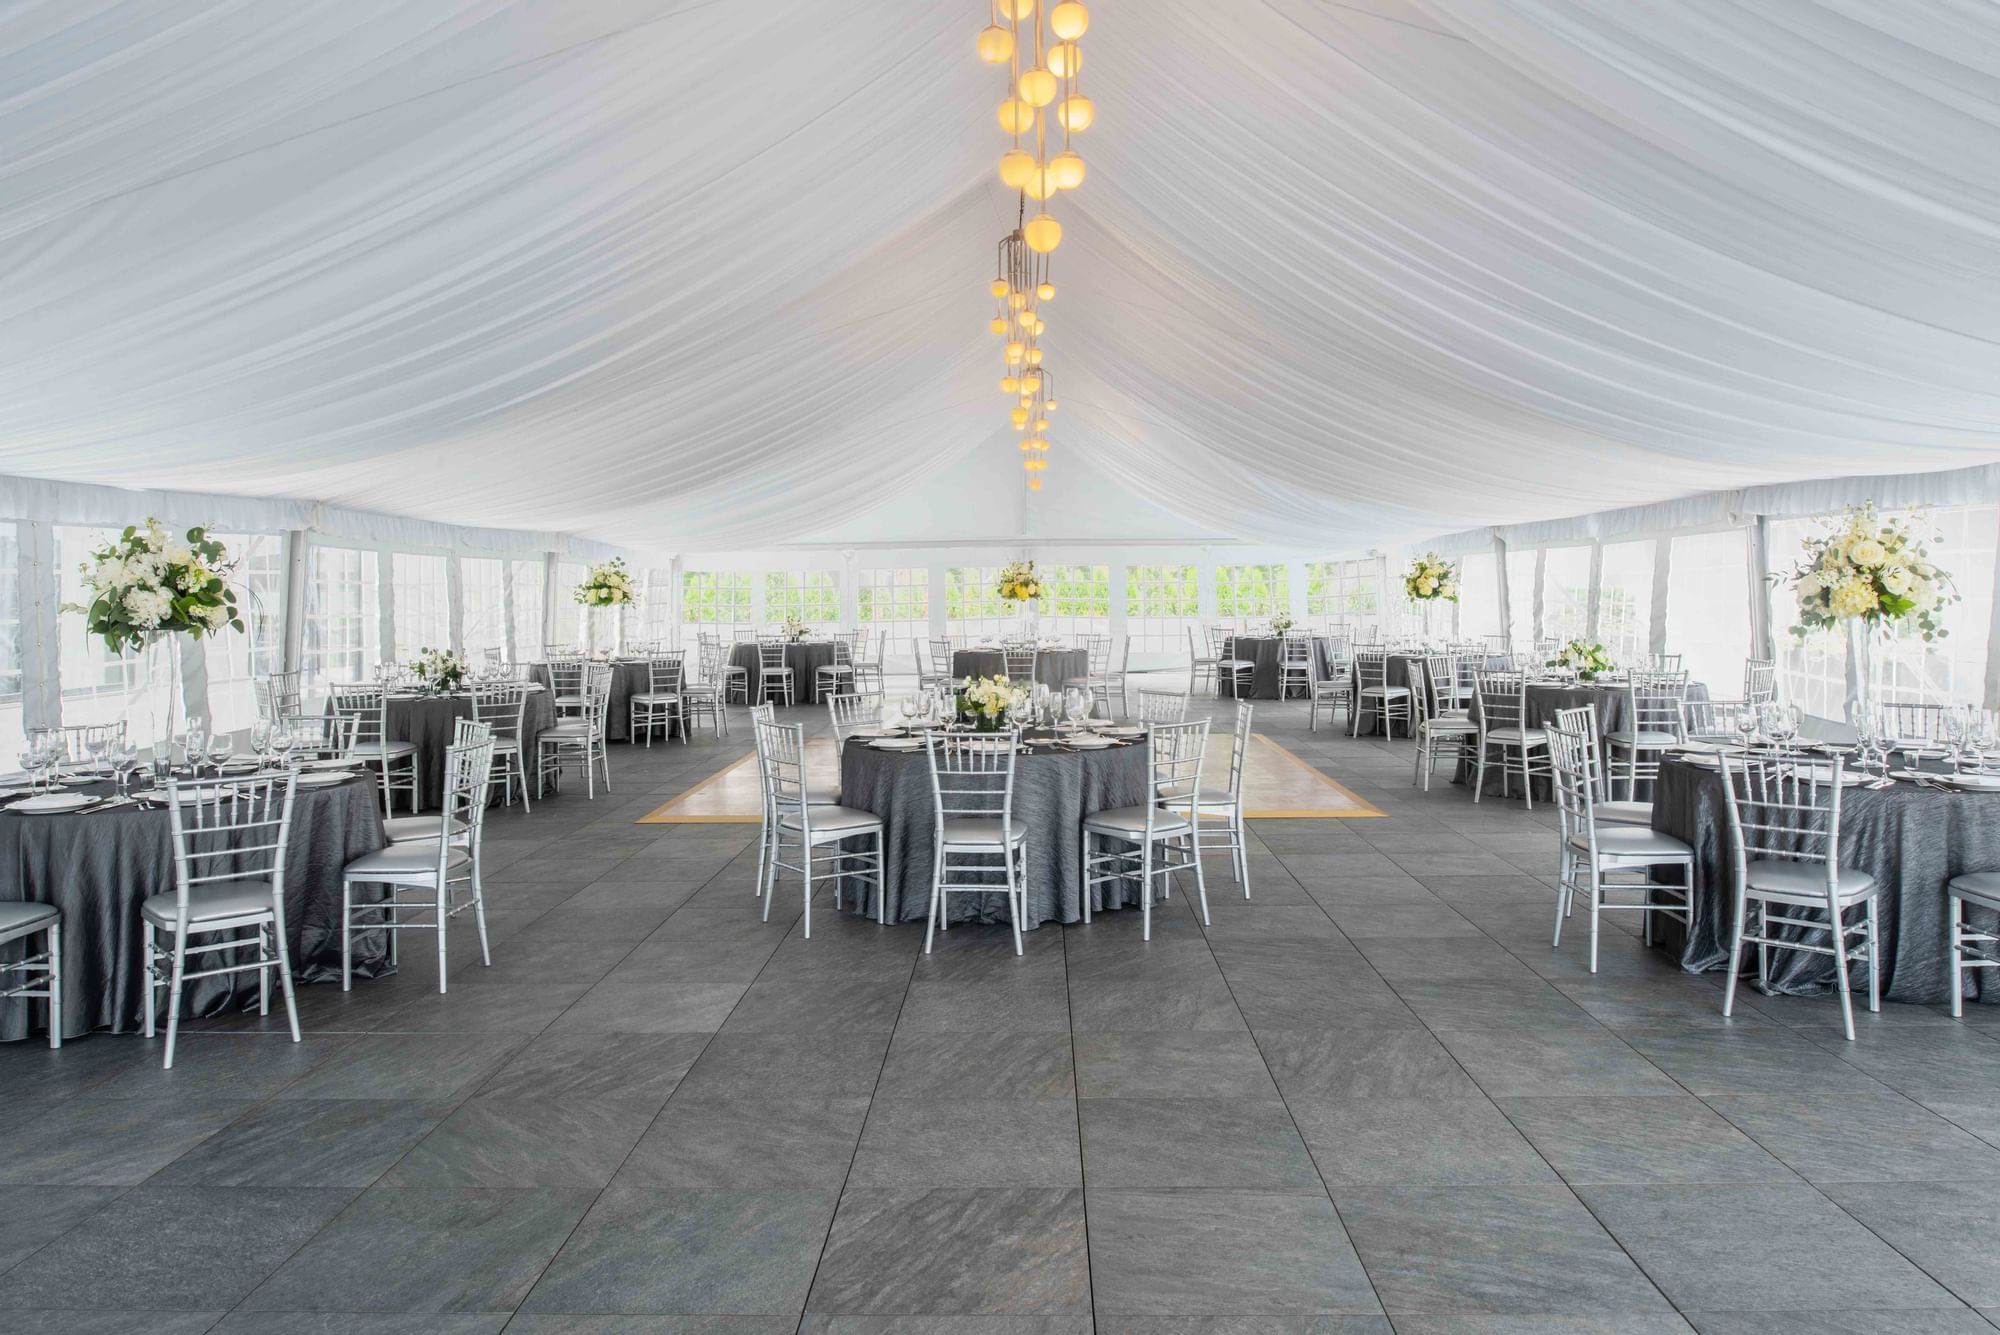 Outdoor event tent set for wedding